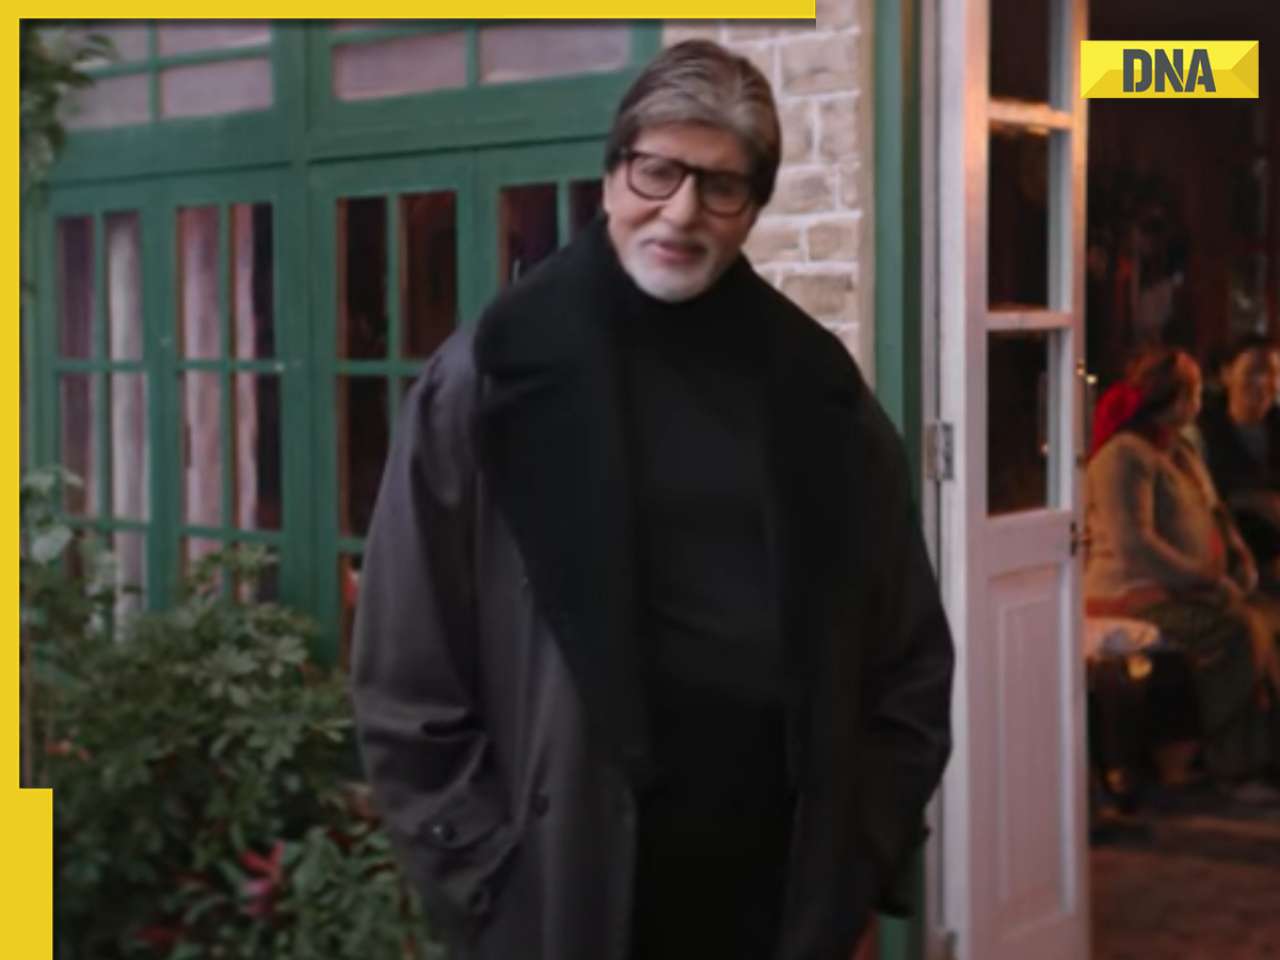 Kaun Banega Crorepati 16: Amitabh Bachchan introduces thought-provoking campaign, fans say 'eagerly waiting for show'